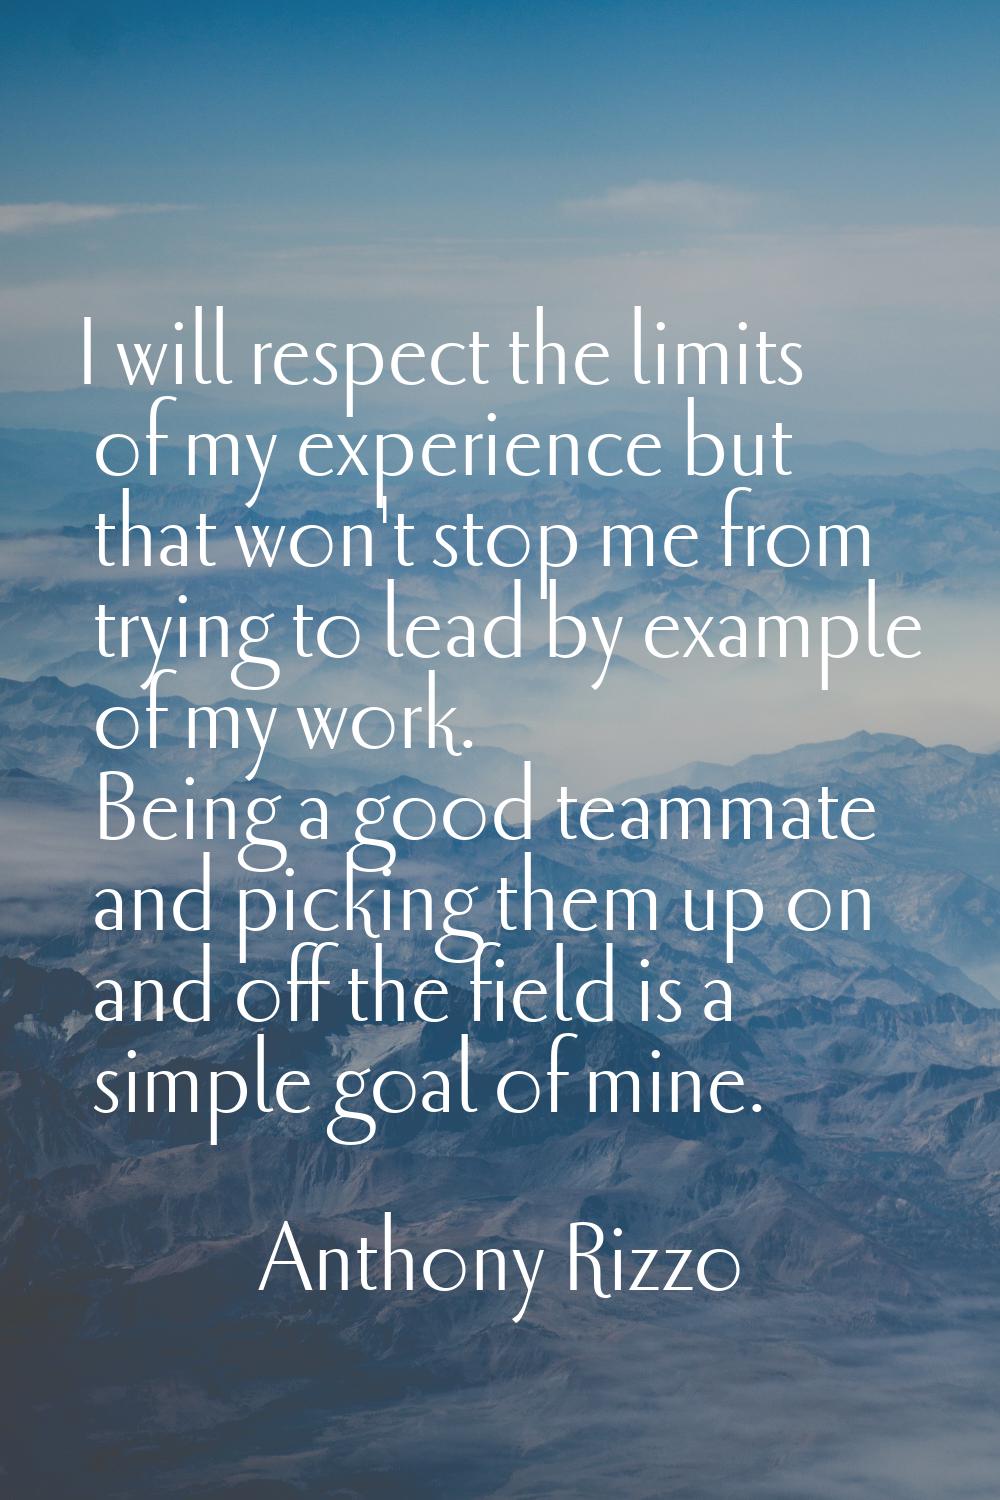 I will respect the limits of my experience but that won't stop me from trying to lead by example of